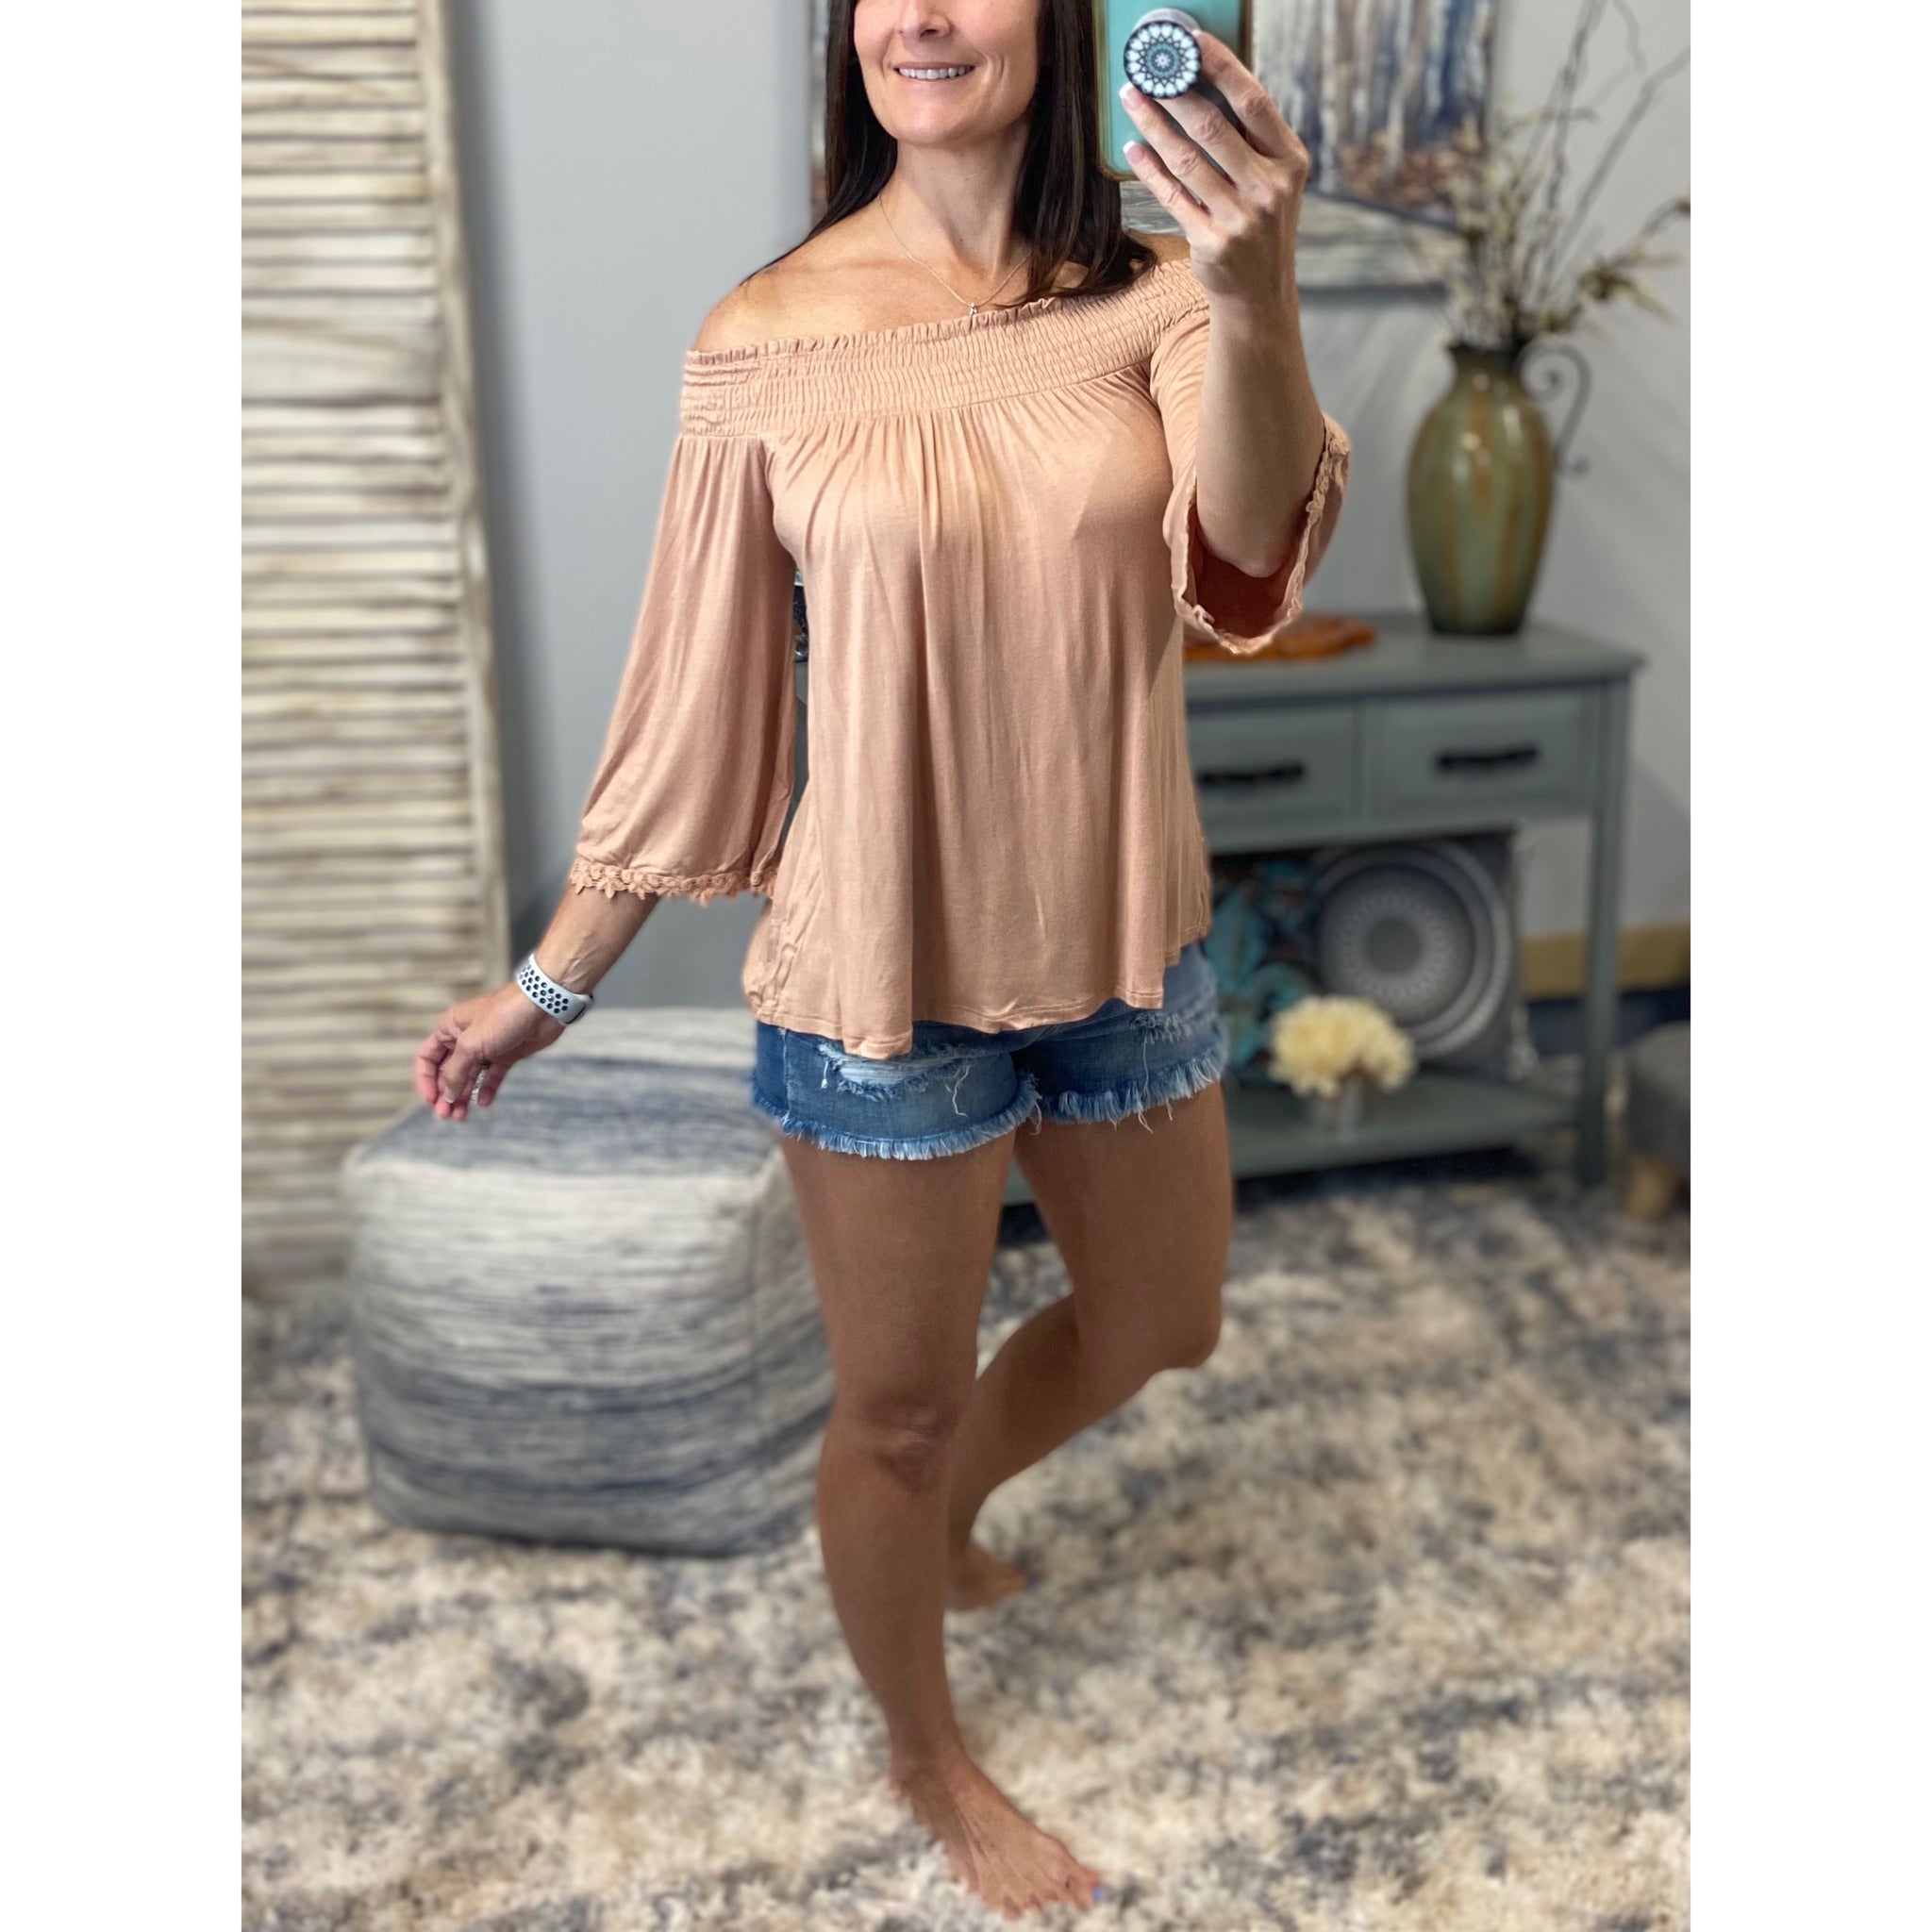 Smocked Off Shoulder Floaty 3/4 Sleeve Blouse Shirt Top Peach S/M/L